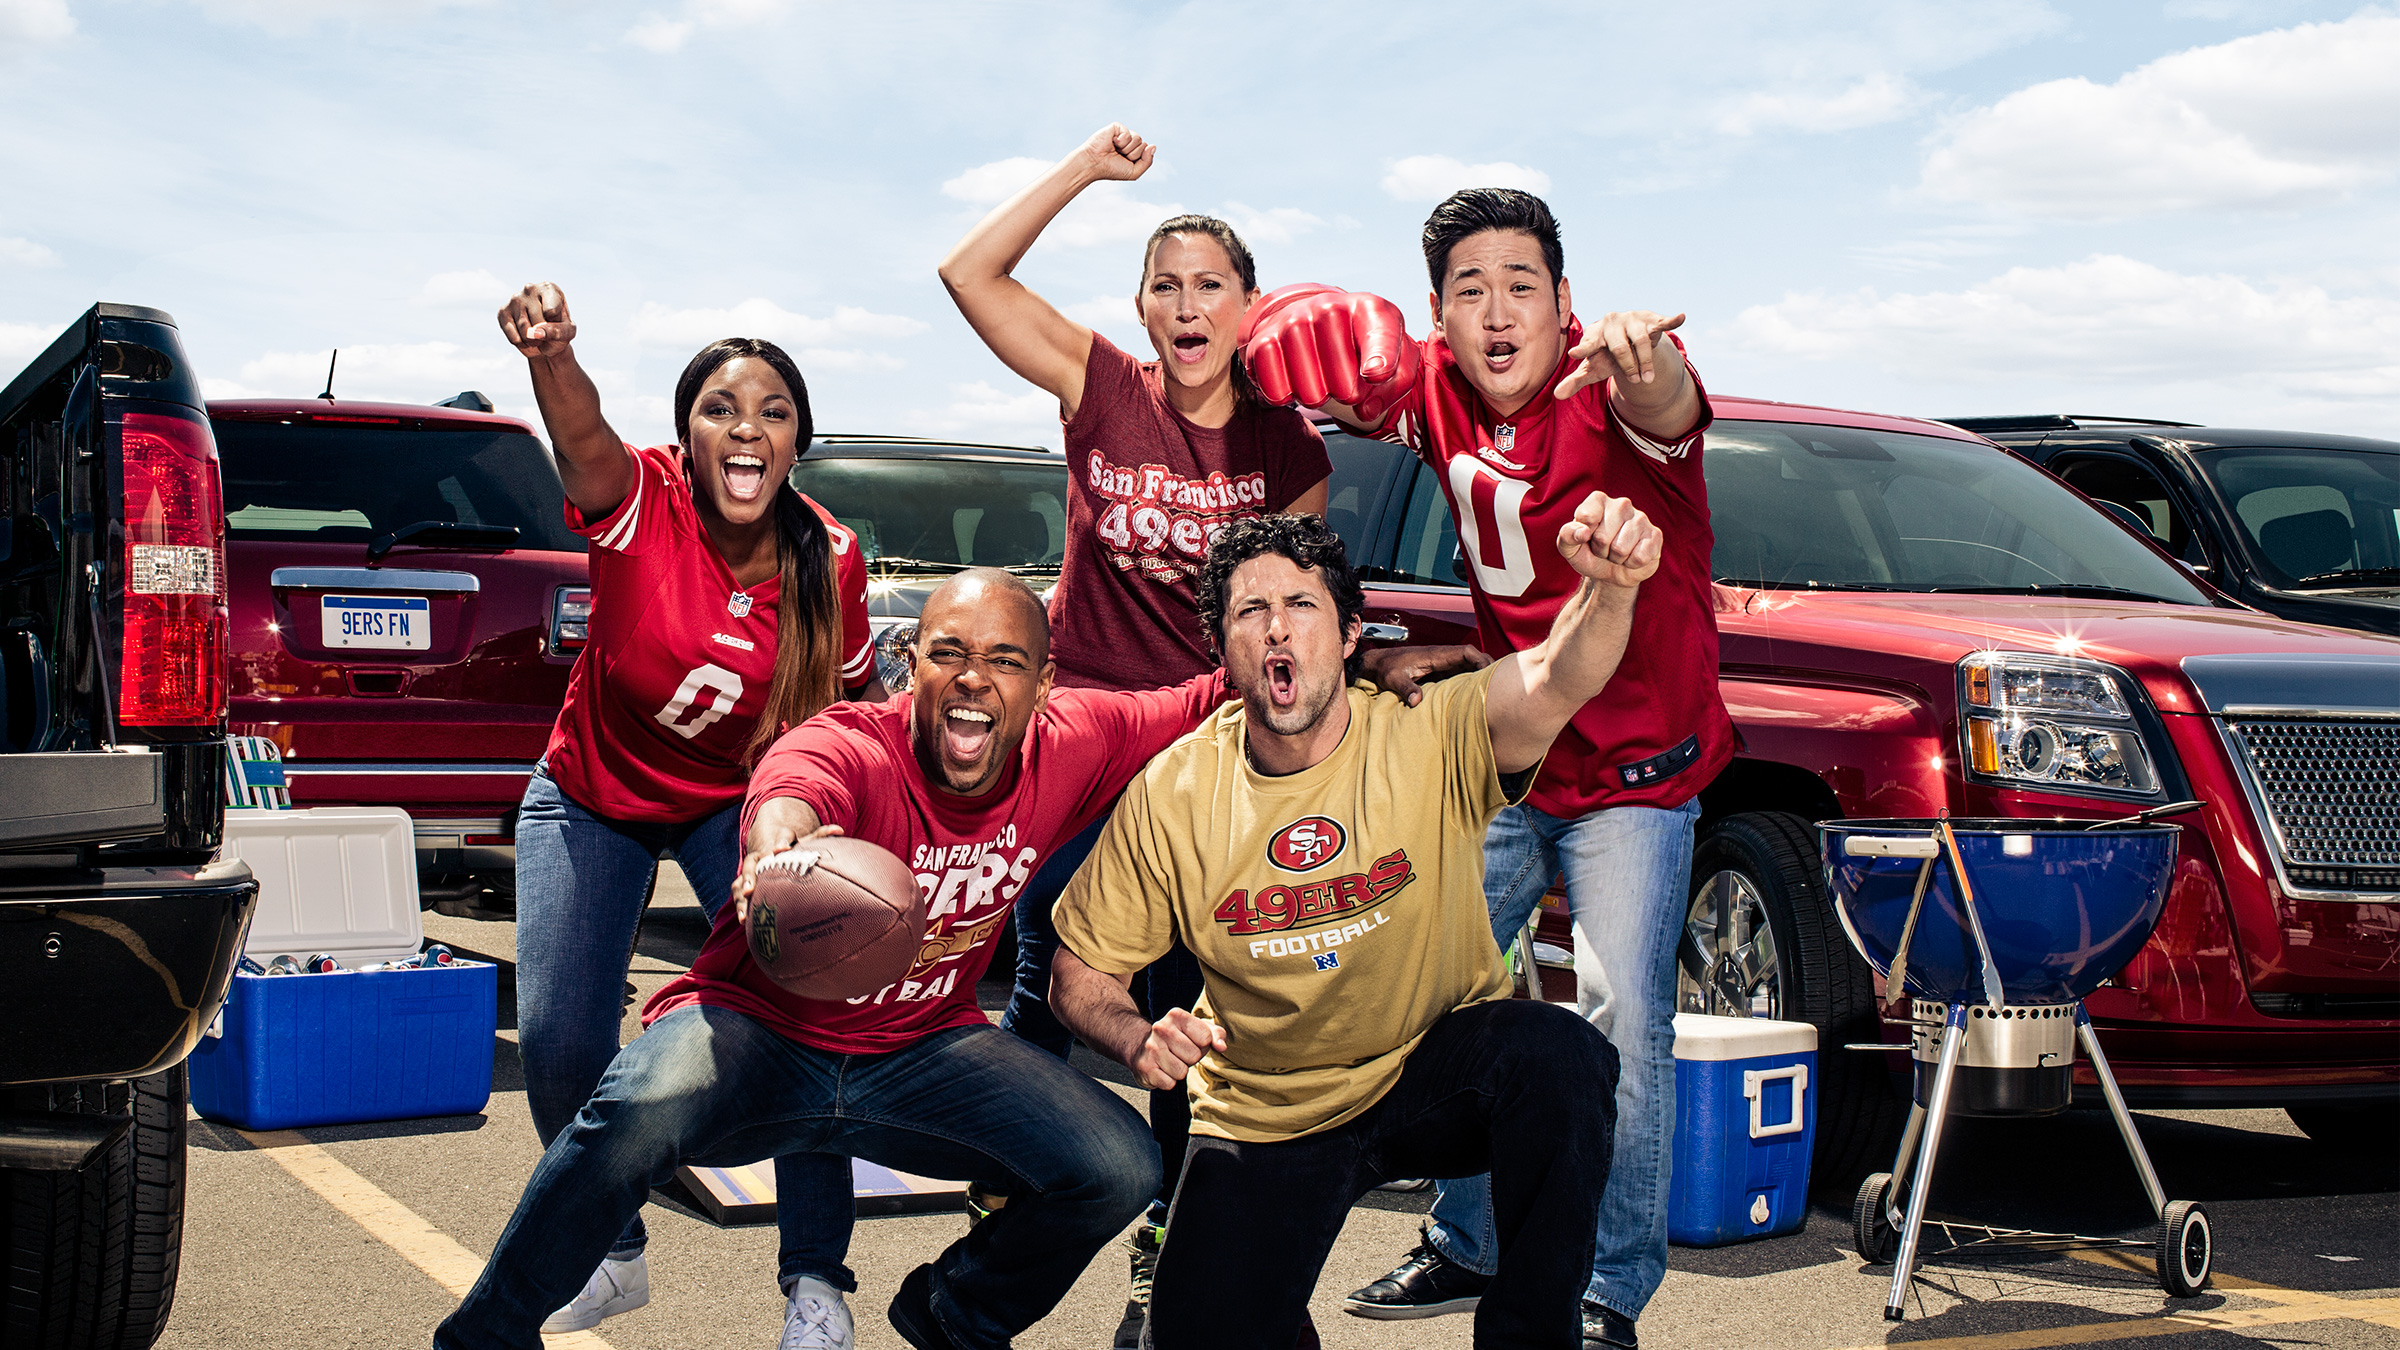 NFL_FritoLay_Tailgating_49ers-018-v1-2-Del